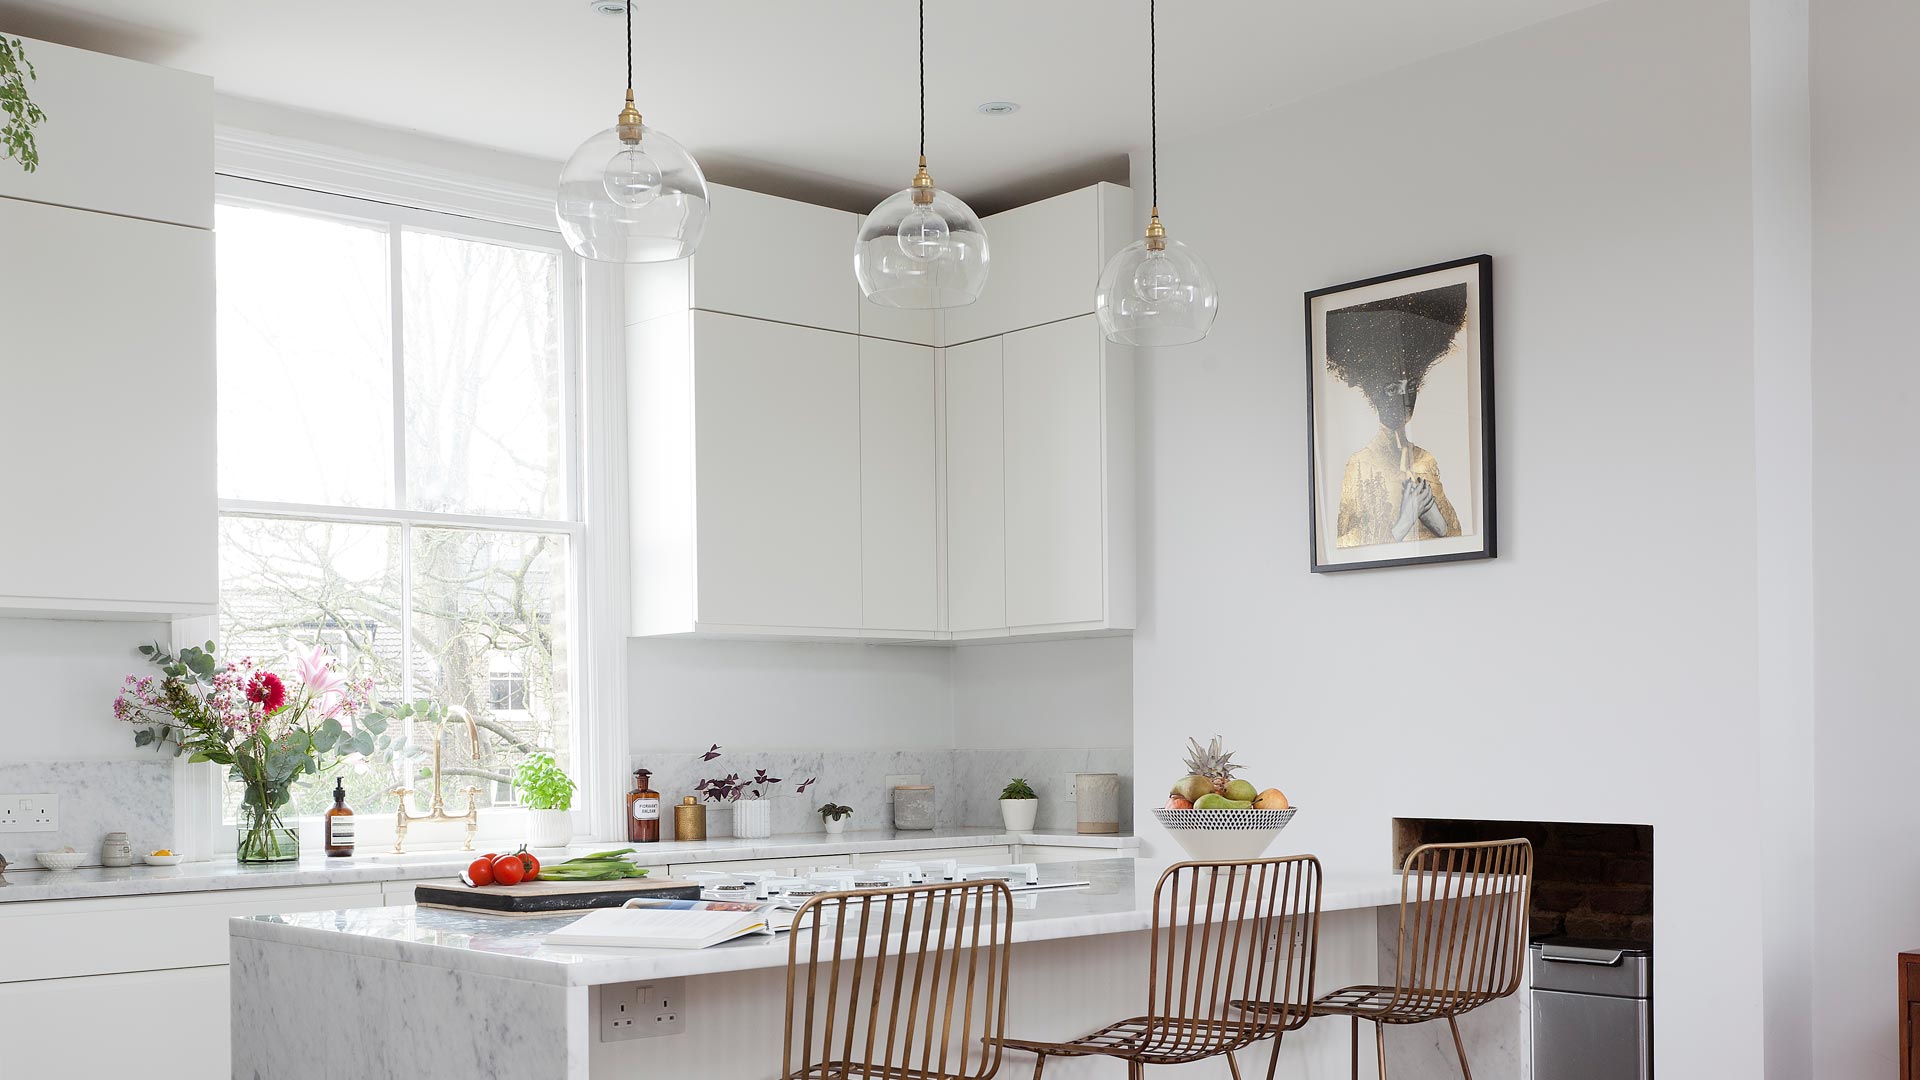 Our Eden globe pendants look perfect above this kitchen island